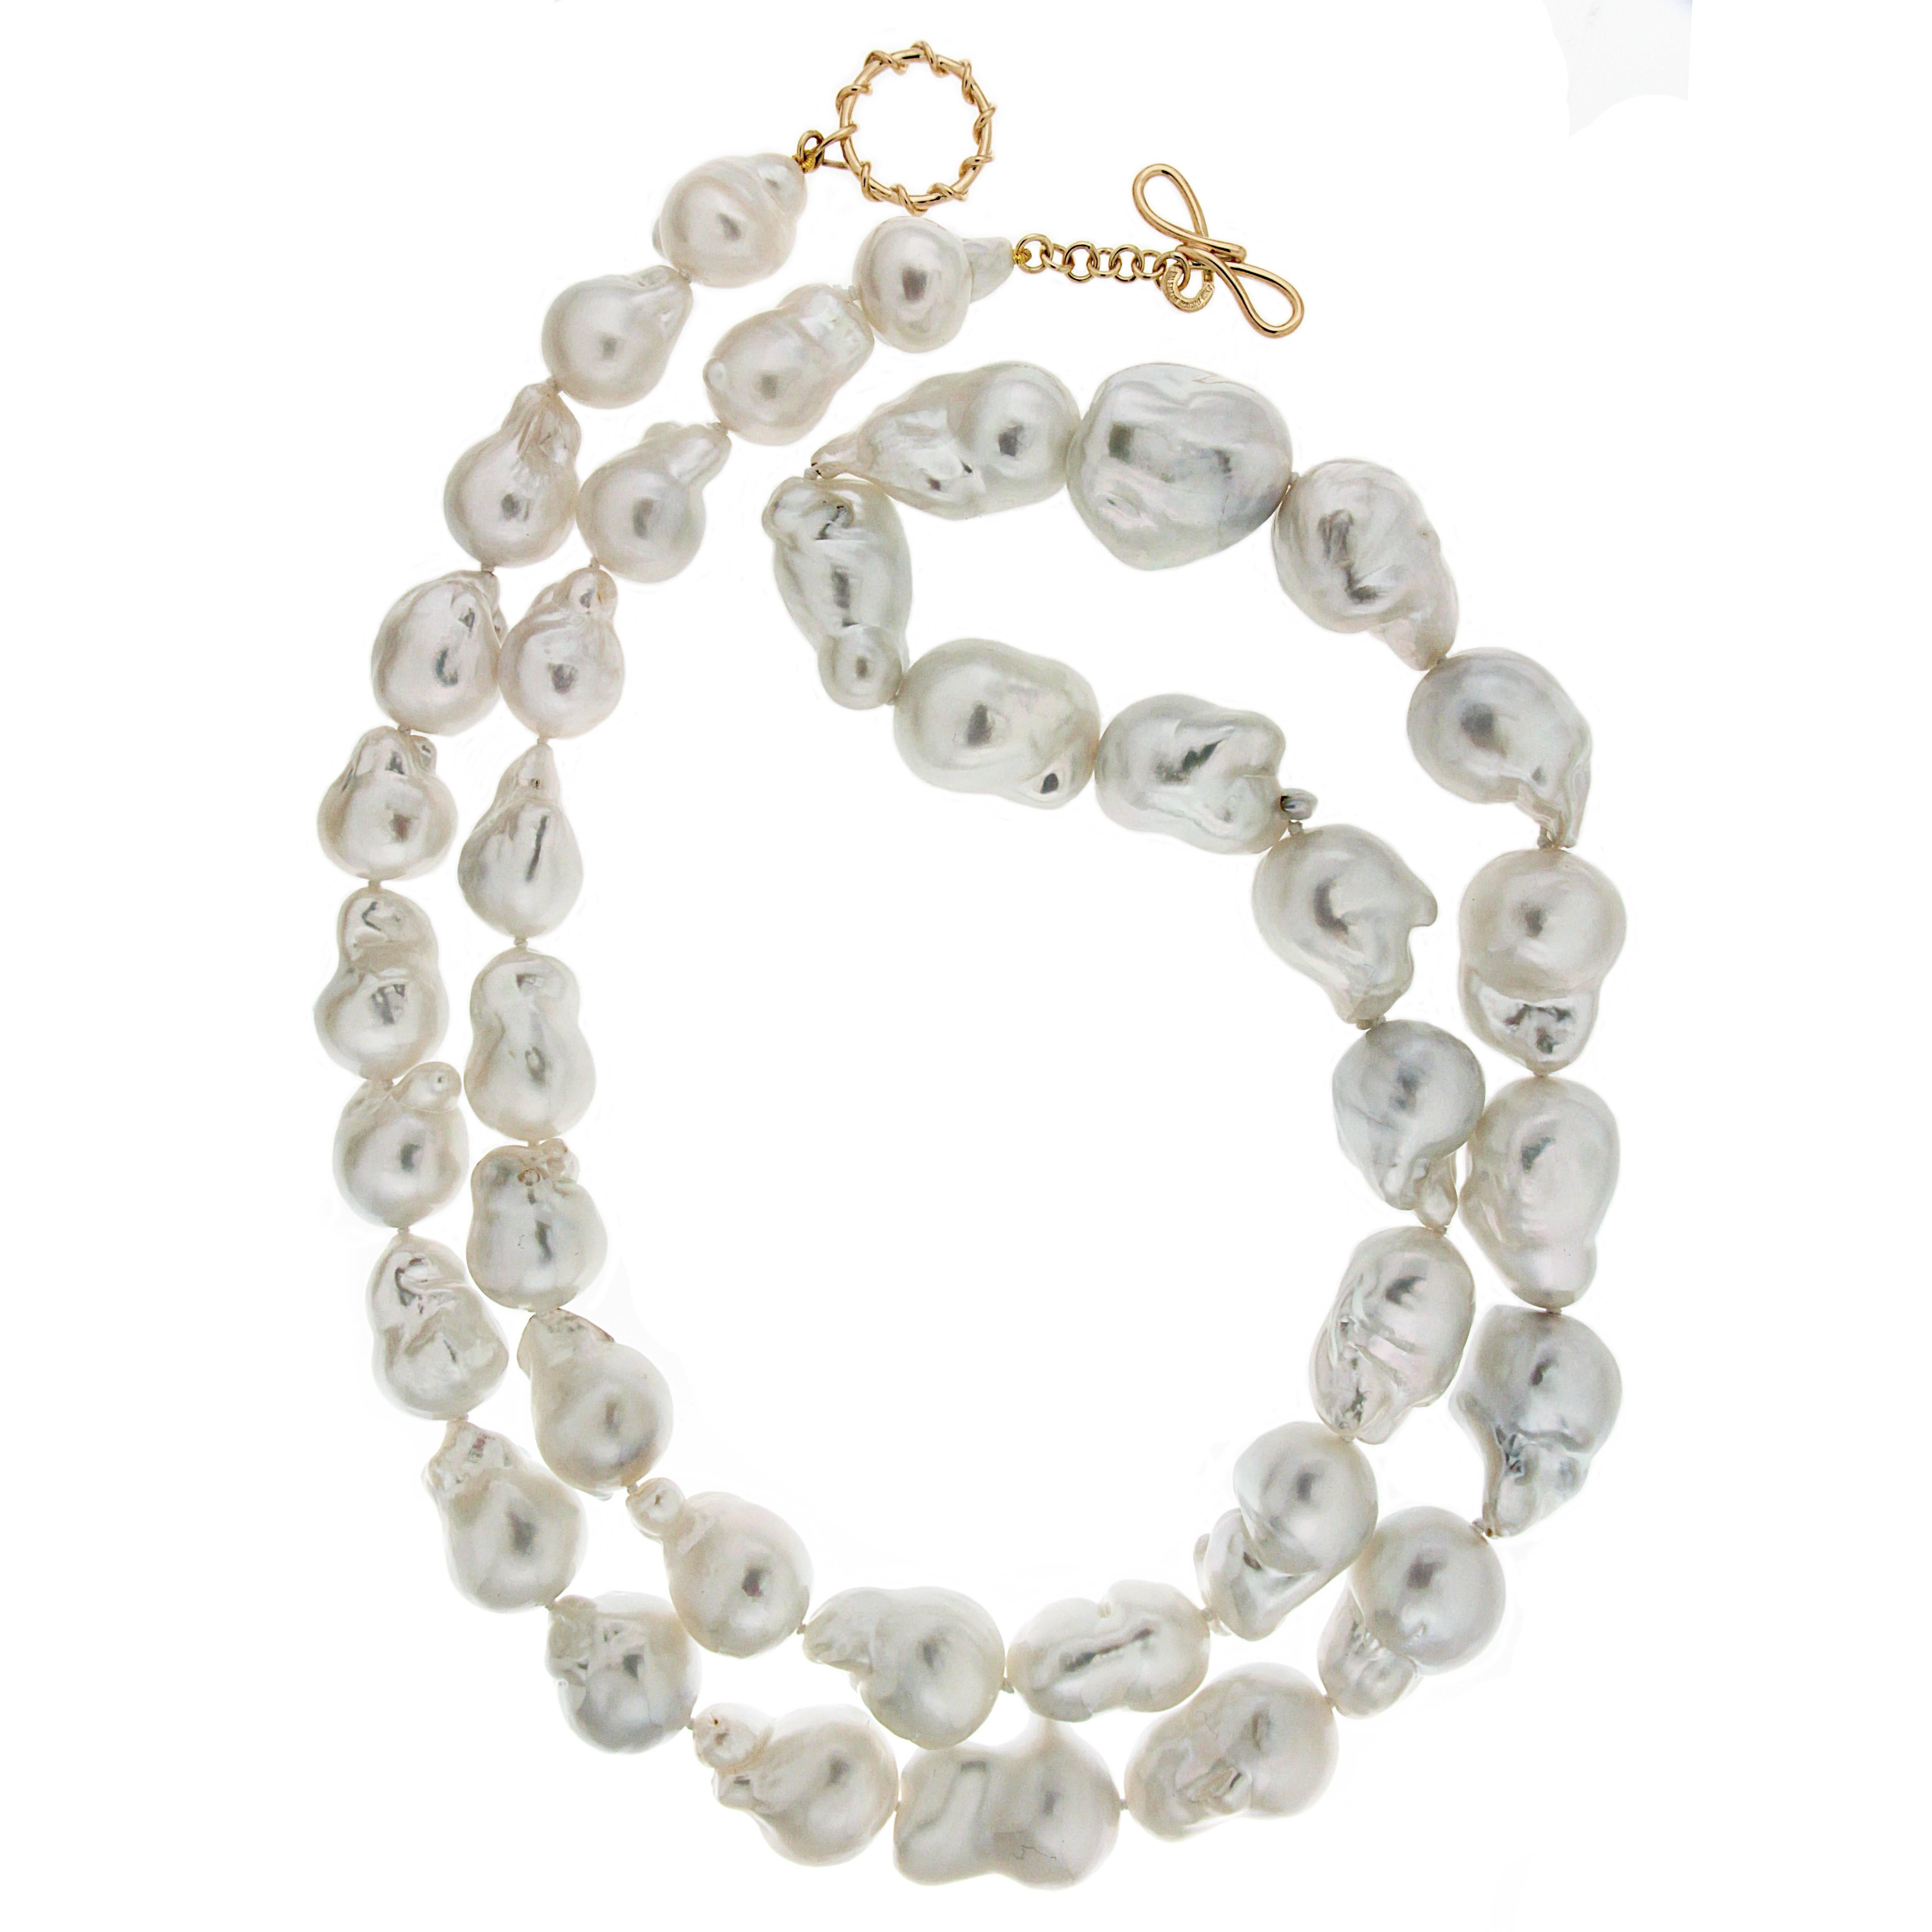 This beautiful necklace features 39 South Sea Baroque pearls with measurements range from 21.9x21.00 to 17.2 x 14mm. The necklace is completed with 18kt yellow gold knot clasp ring and toggle.